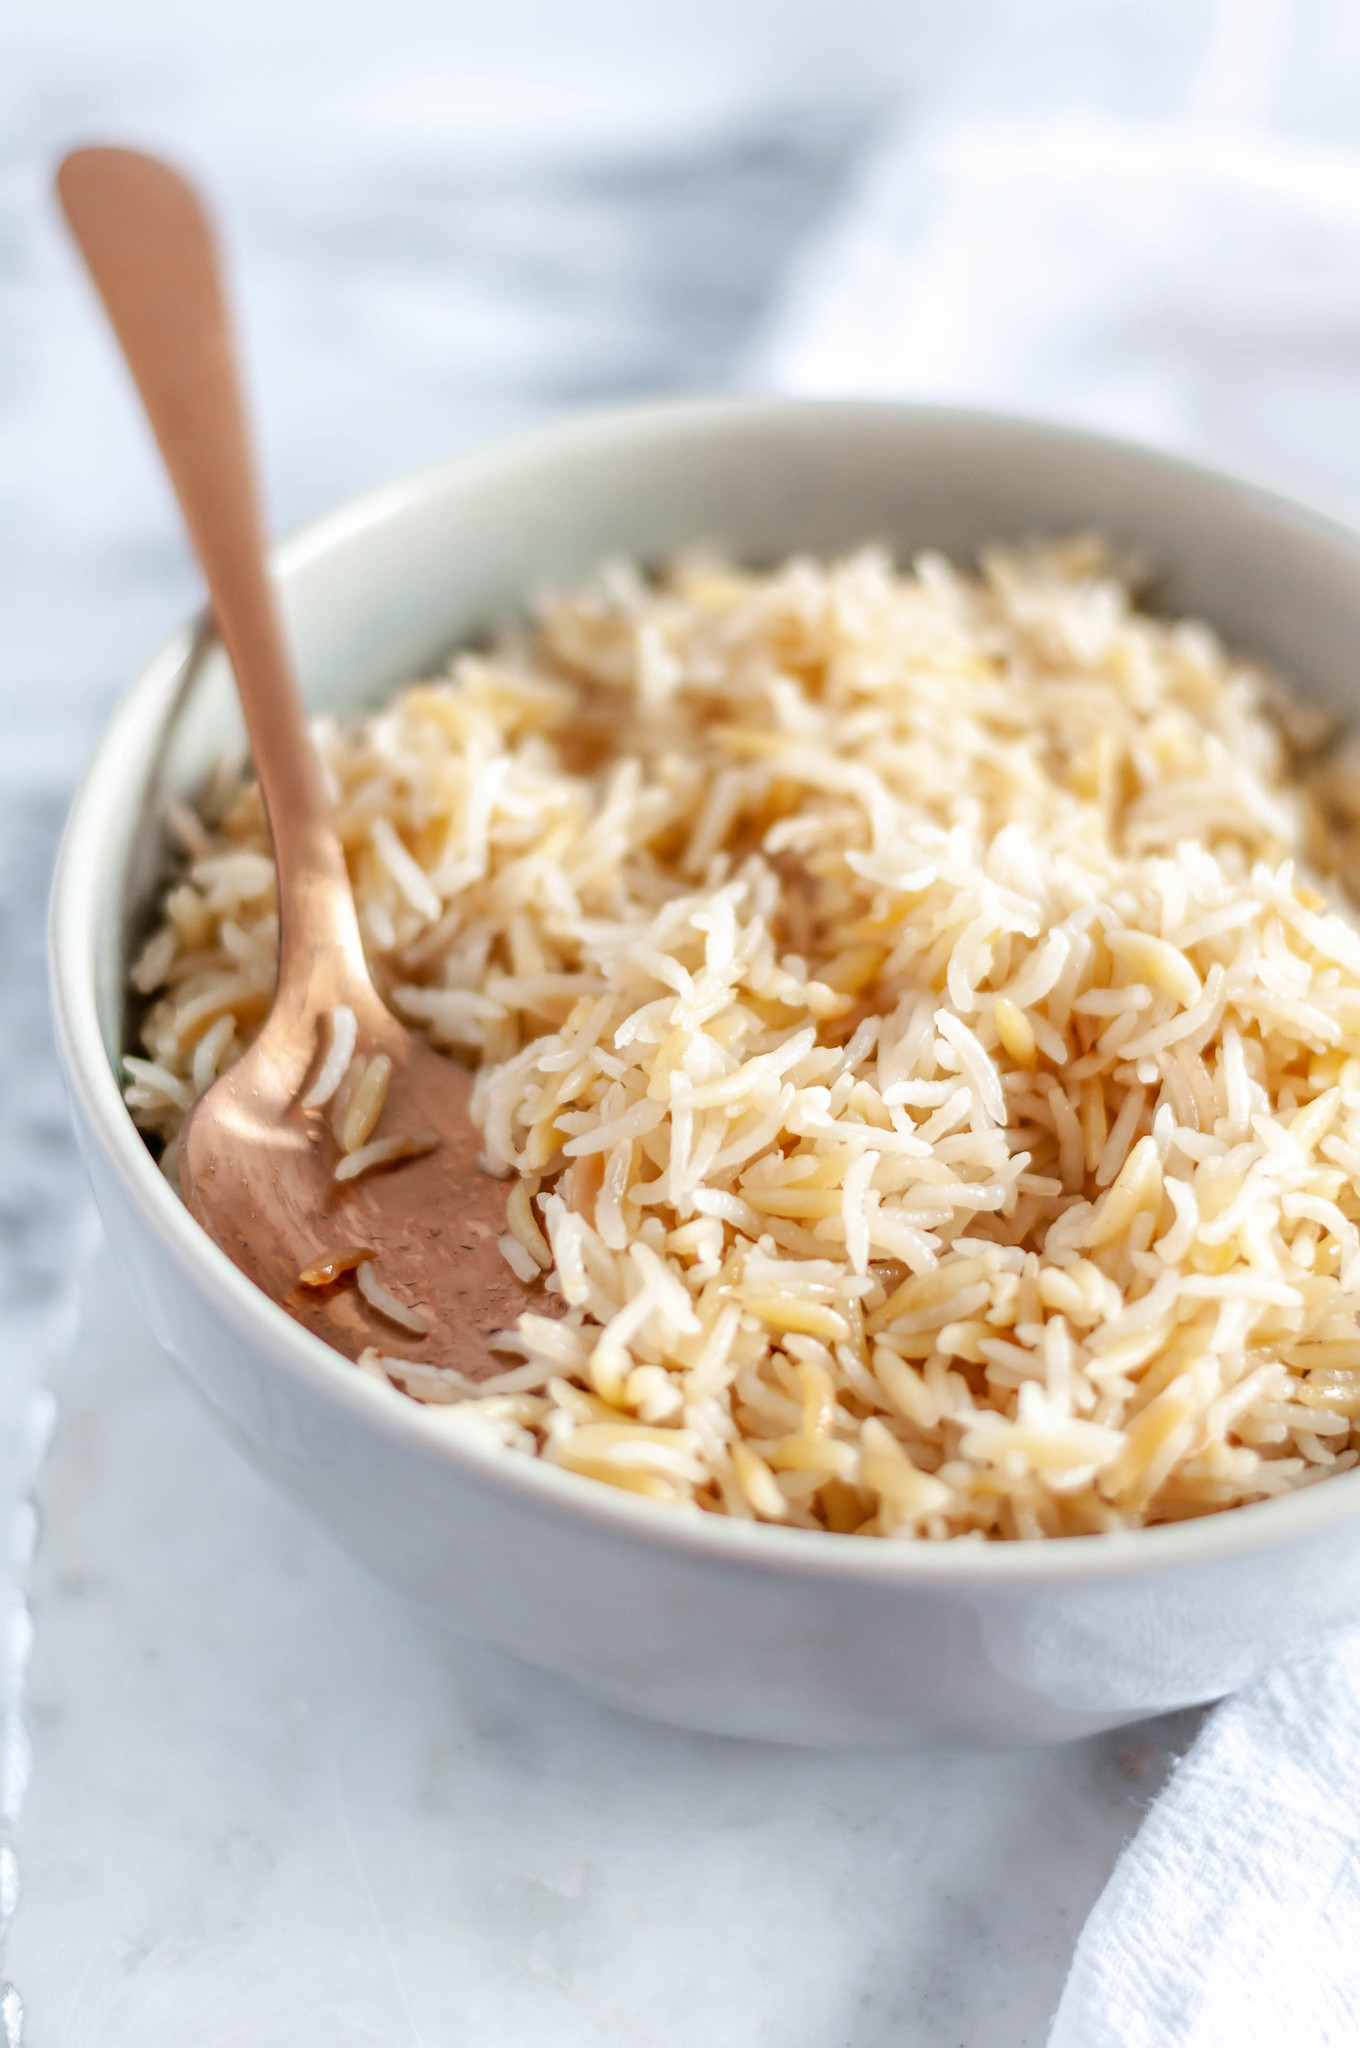 Make this Instant Pot Rice Pilaf for a super simple and flavorful side dish any night of the week. Staple pantry ingredients make up the dish and it takes less than 20 minutes to make. Perfect for a busy weeknight meal.